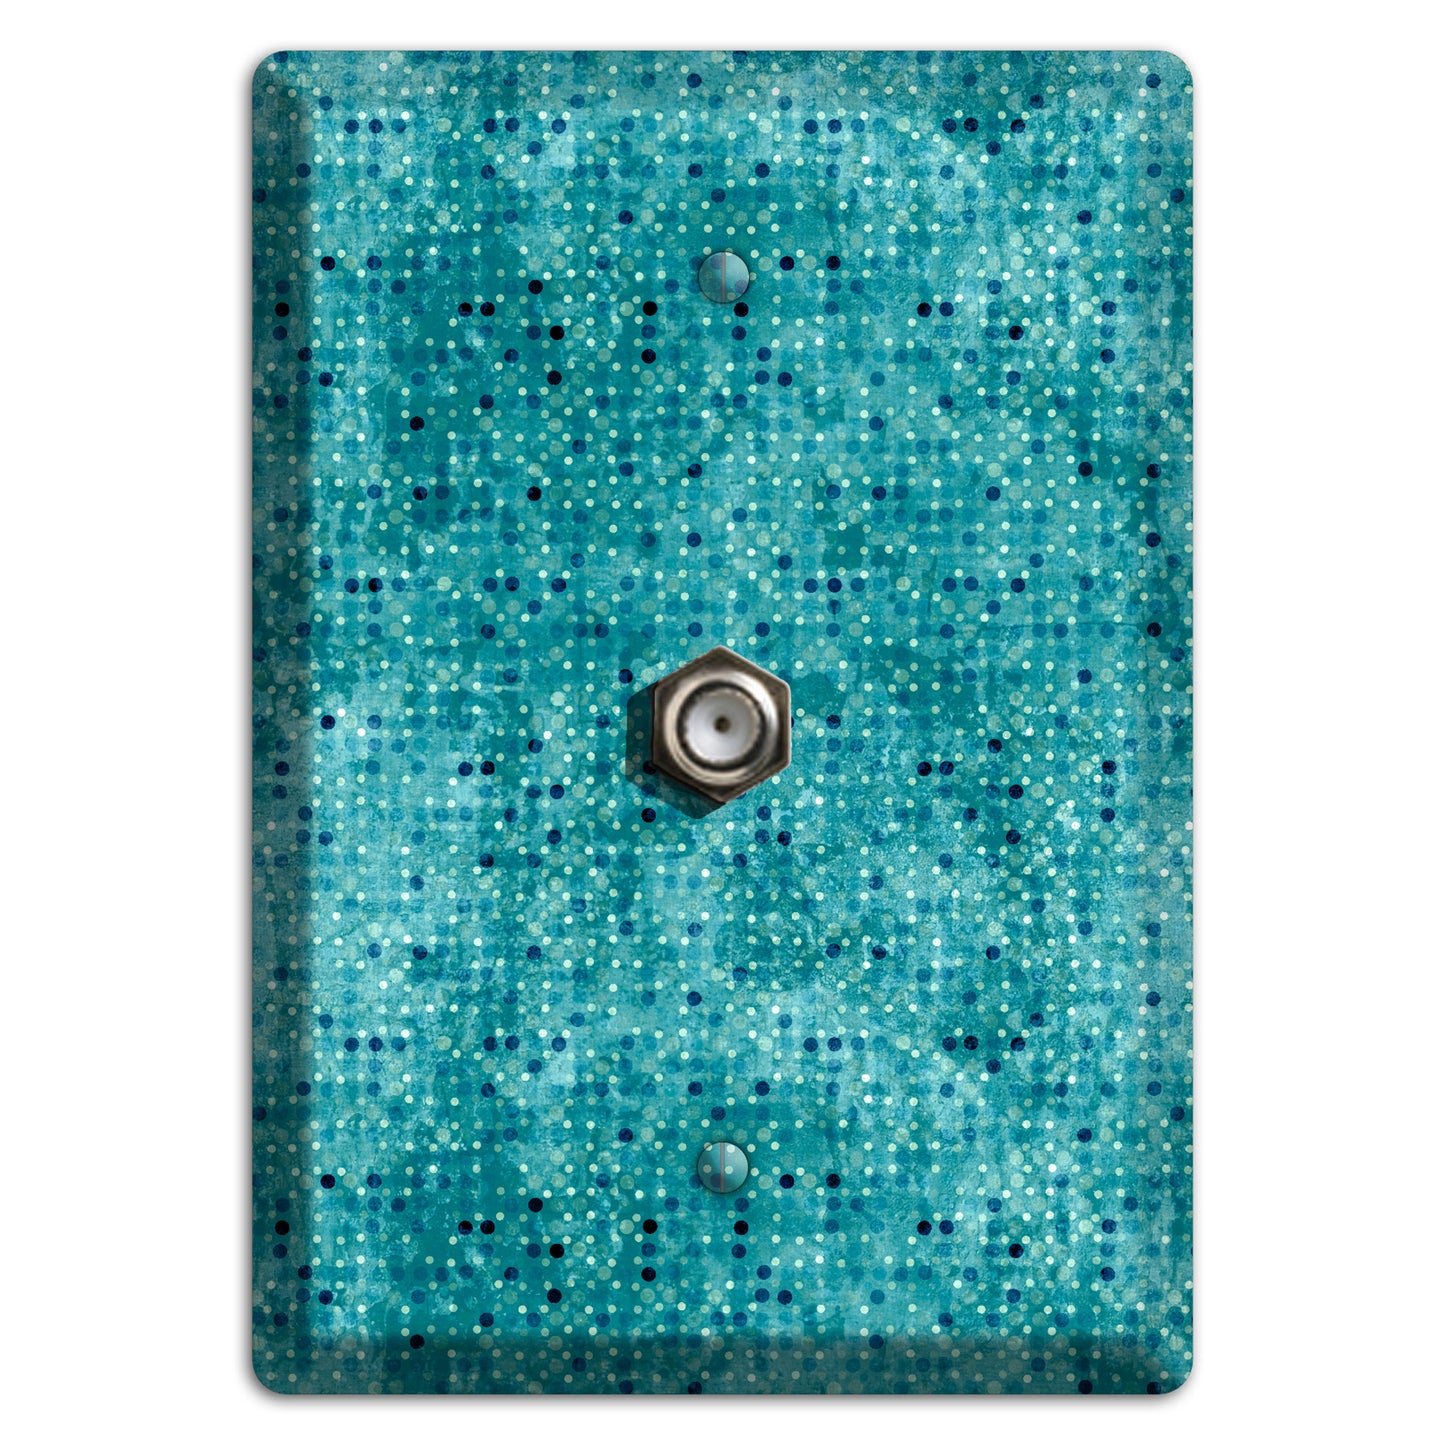 Turquoise Grunge Small Tile Cable Wallplate